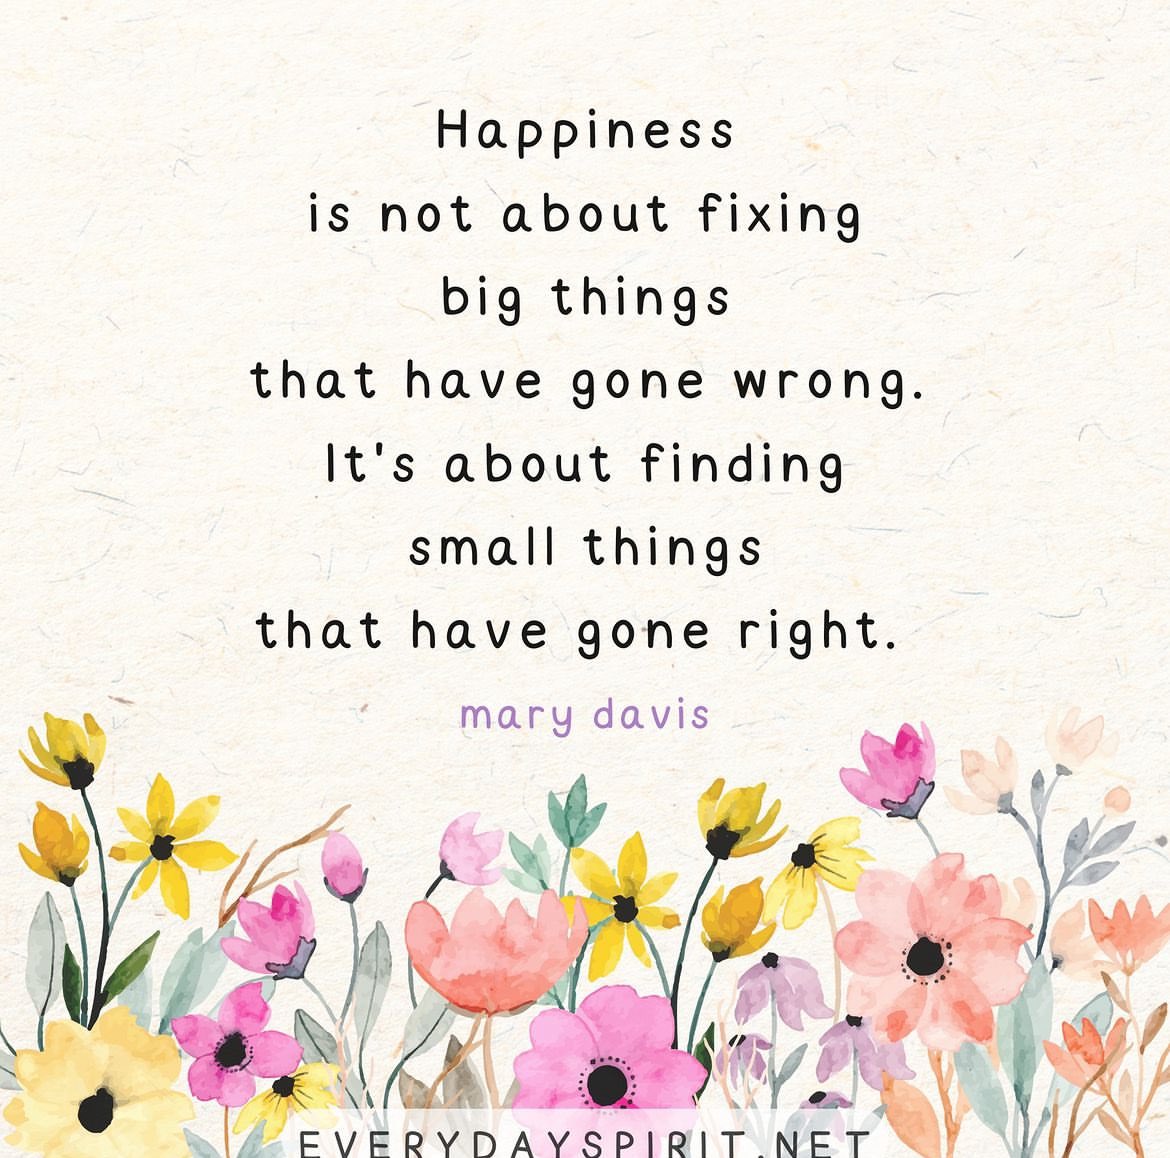 Today, find the small things that have gone right. #TeamUpstanders